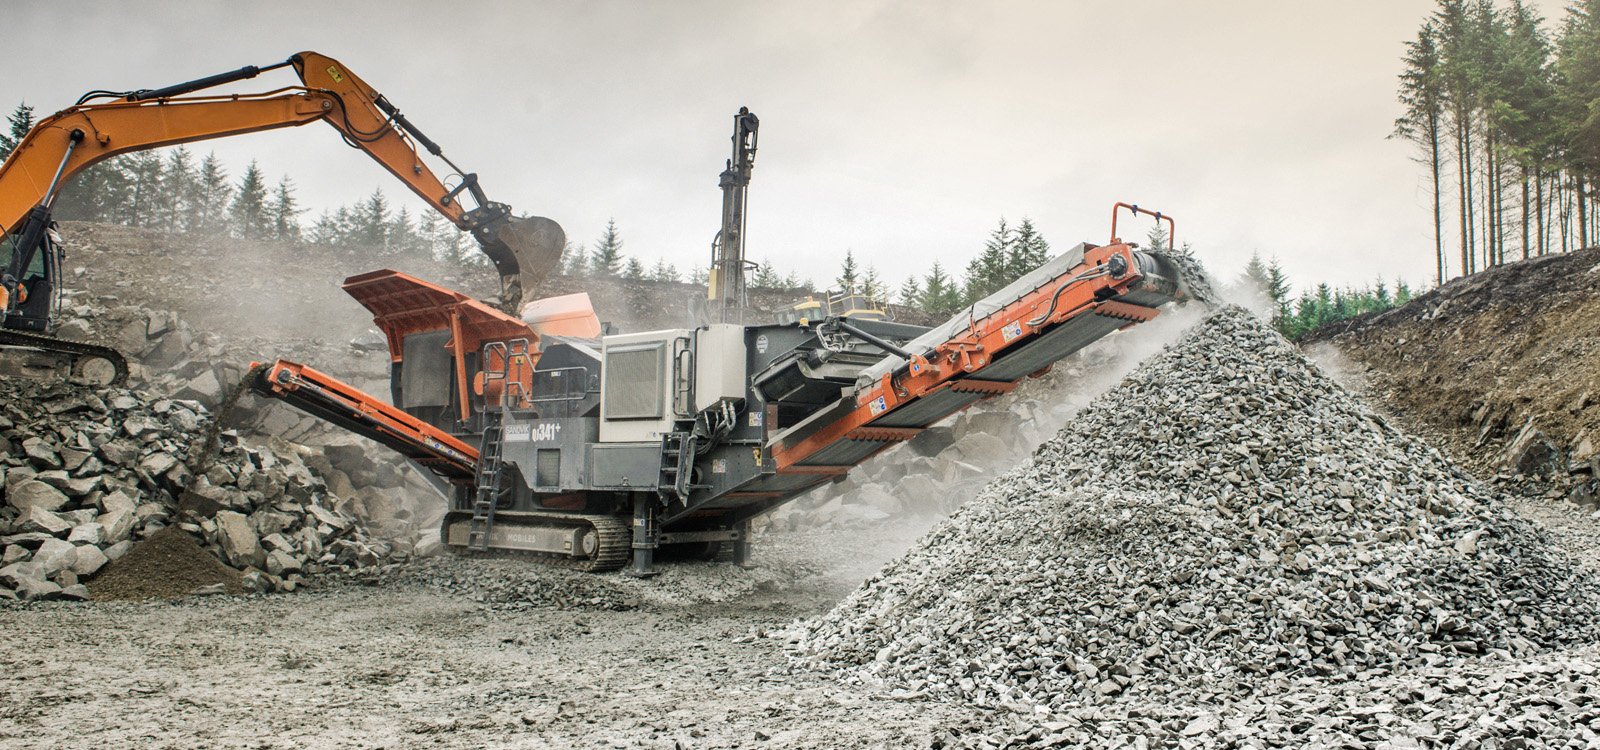 <p>Sandvik QJ341+ is a state-of-the-art mobile jaw crusher.</p>
